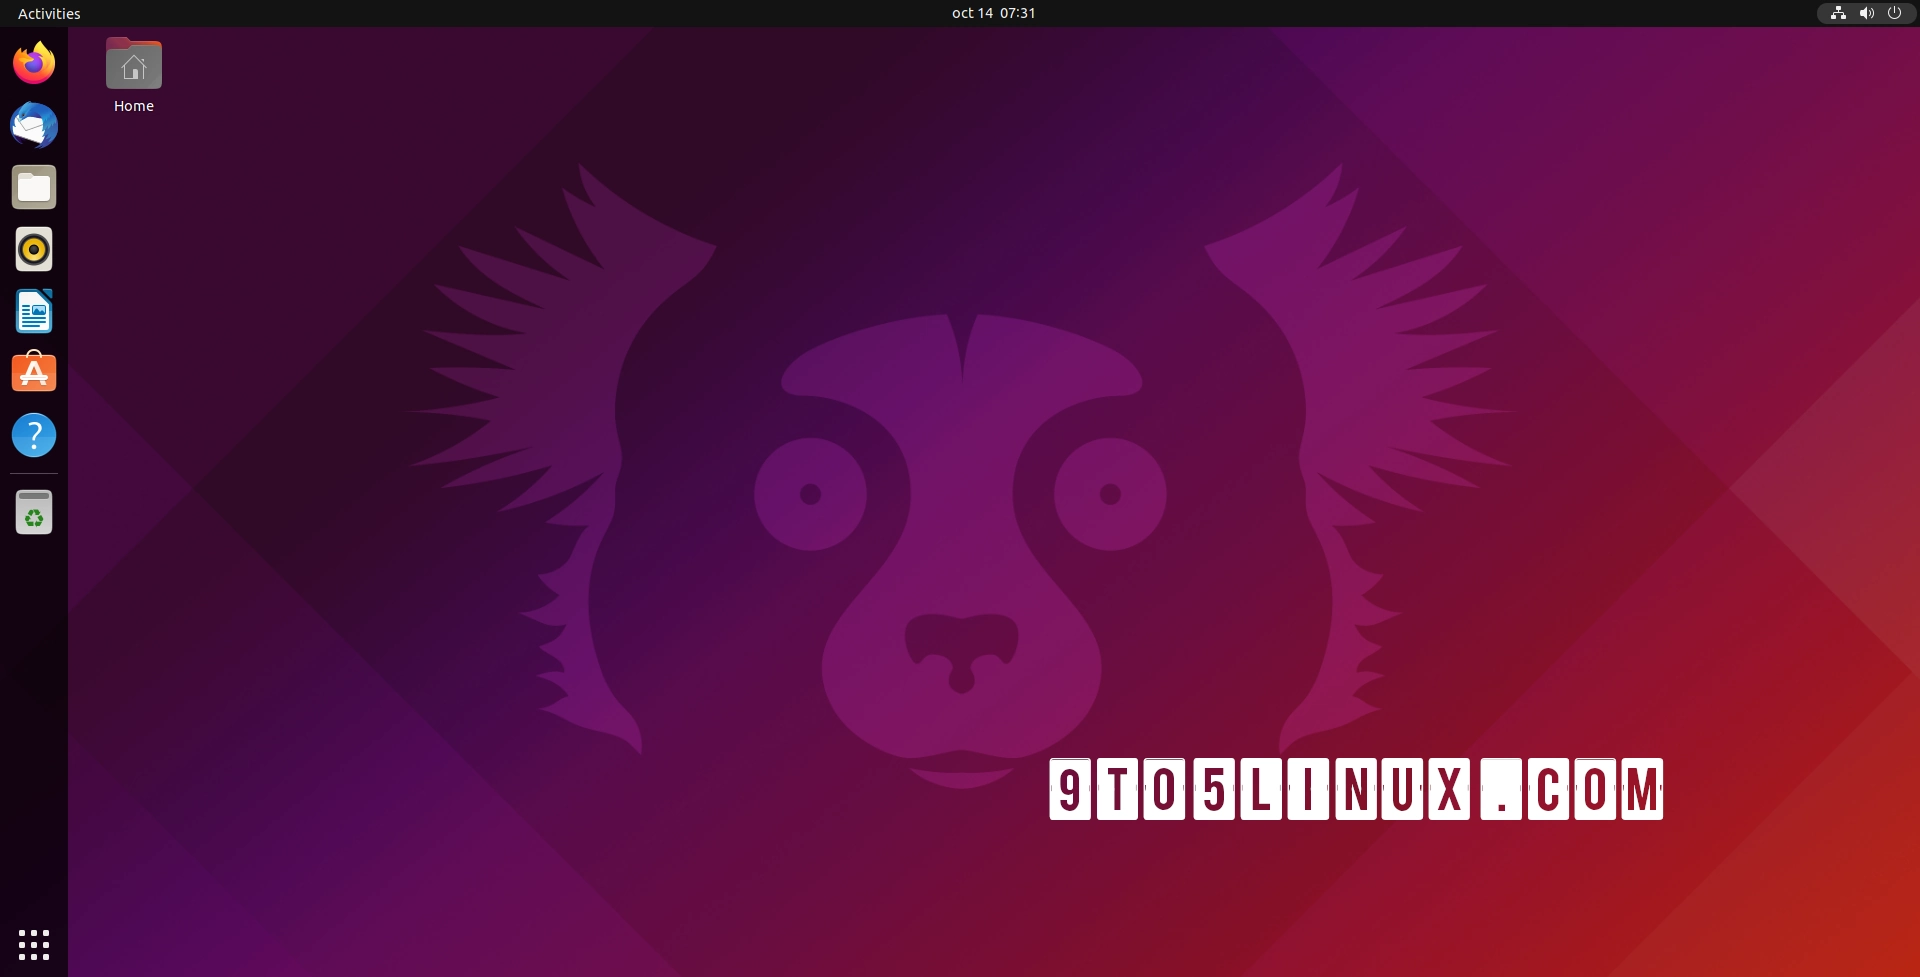 Ubuntu 21.10 “Impish Indri” Is Now Available for Download, This Is What’s New